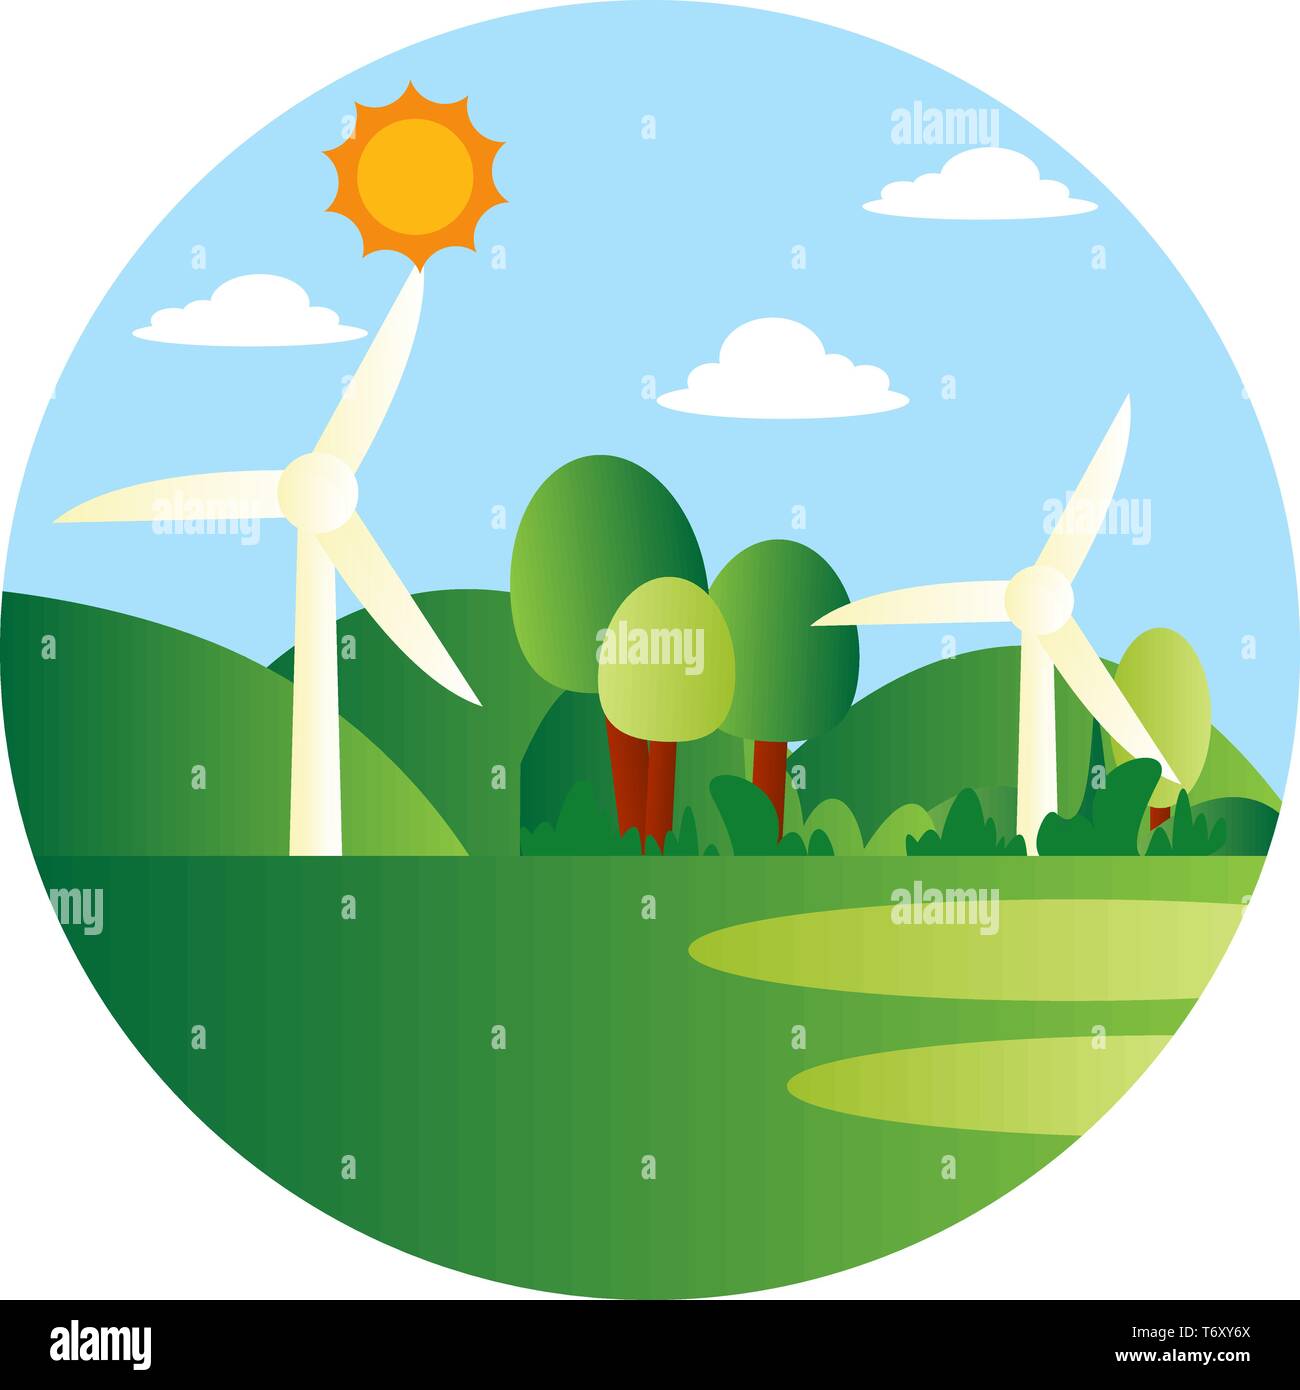 Wind as a energy source illustration vector on white background Stock Vector